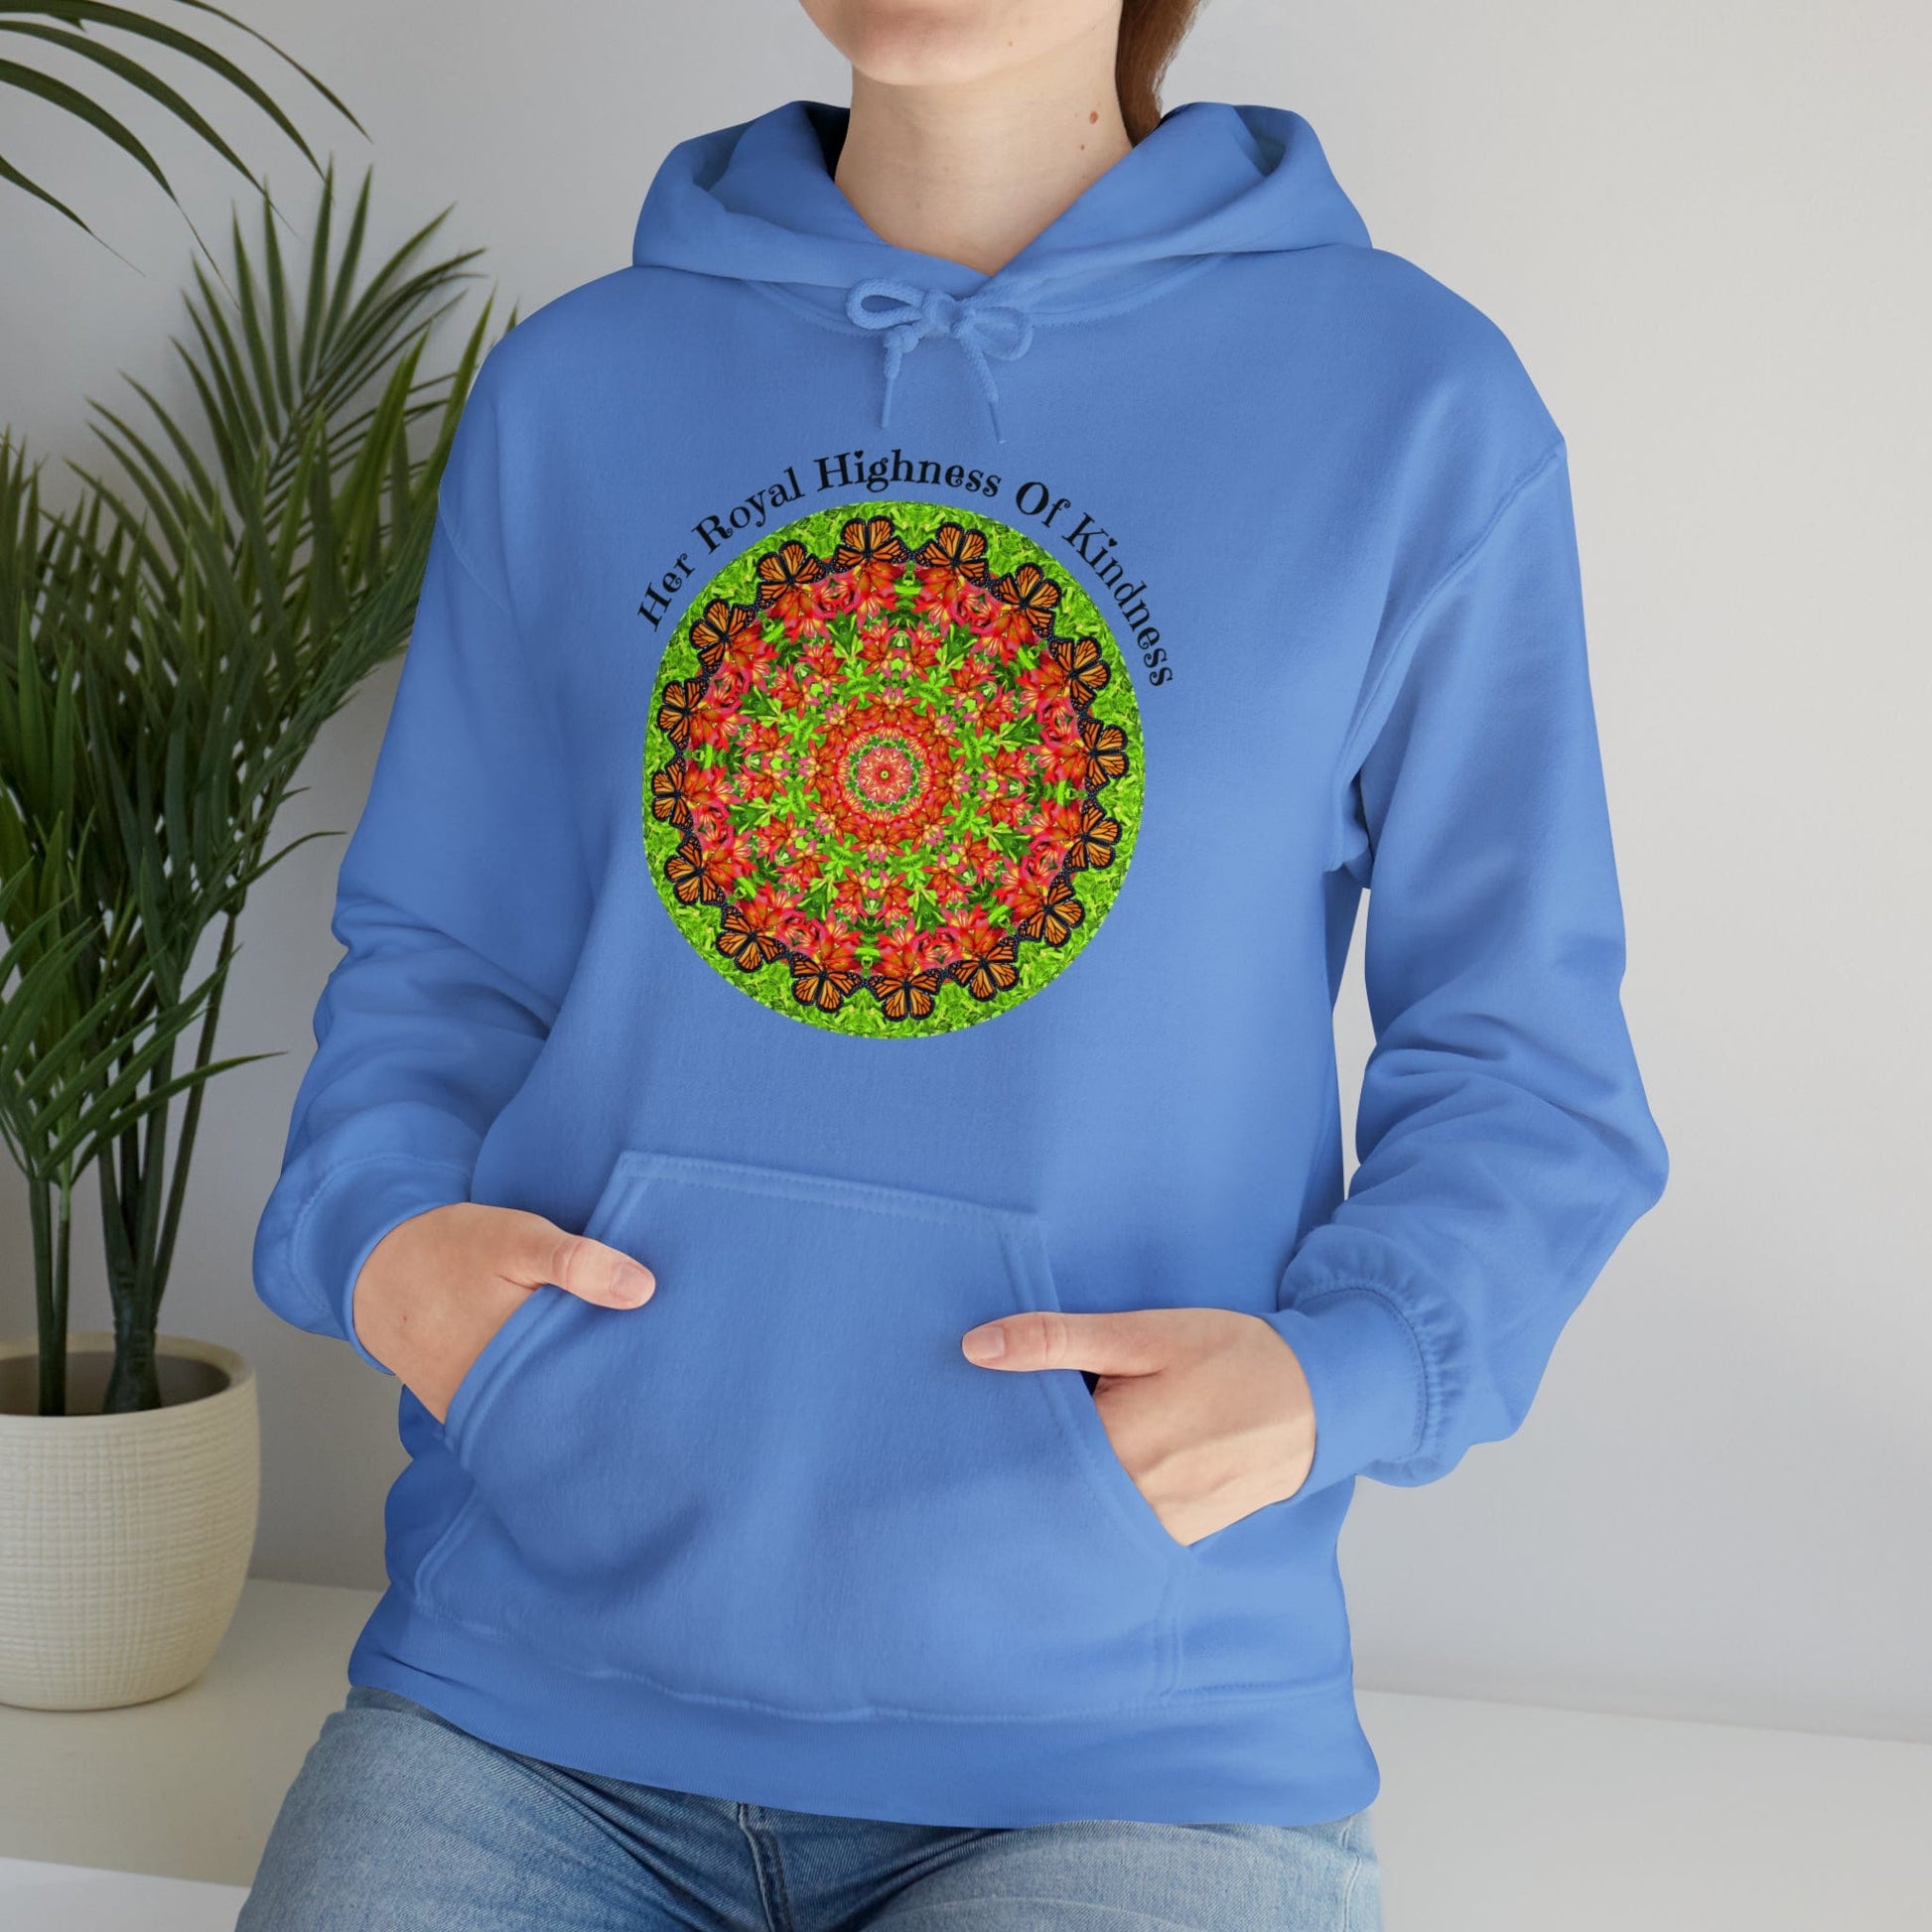 Monarch Butterfly Love Sweatshirt Pullover Hoodie – Her Royal Highness Of Kindness carolina blue